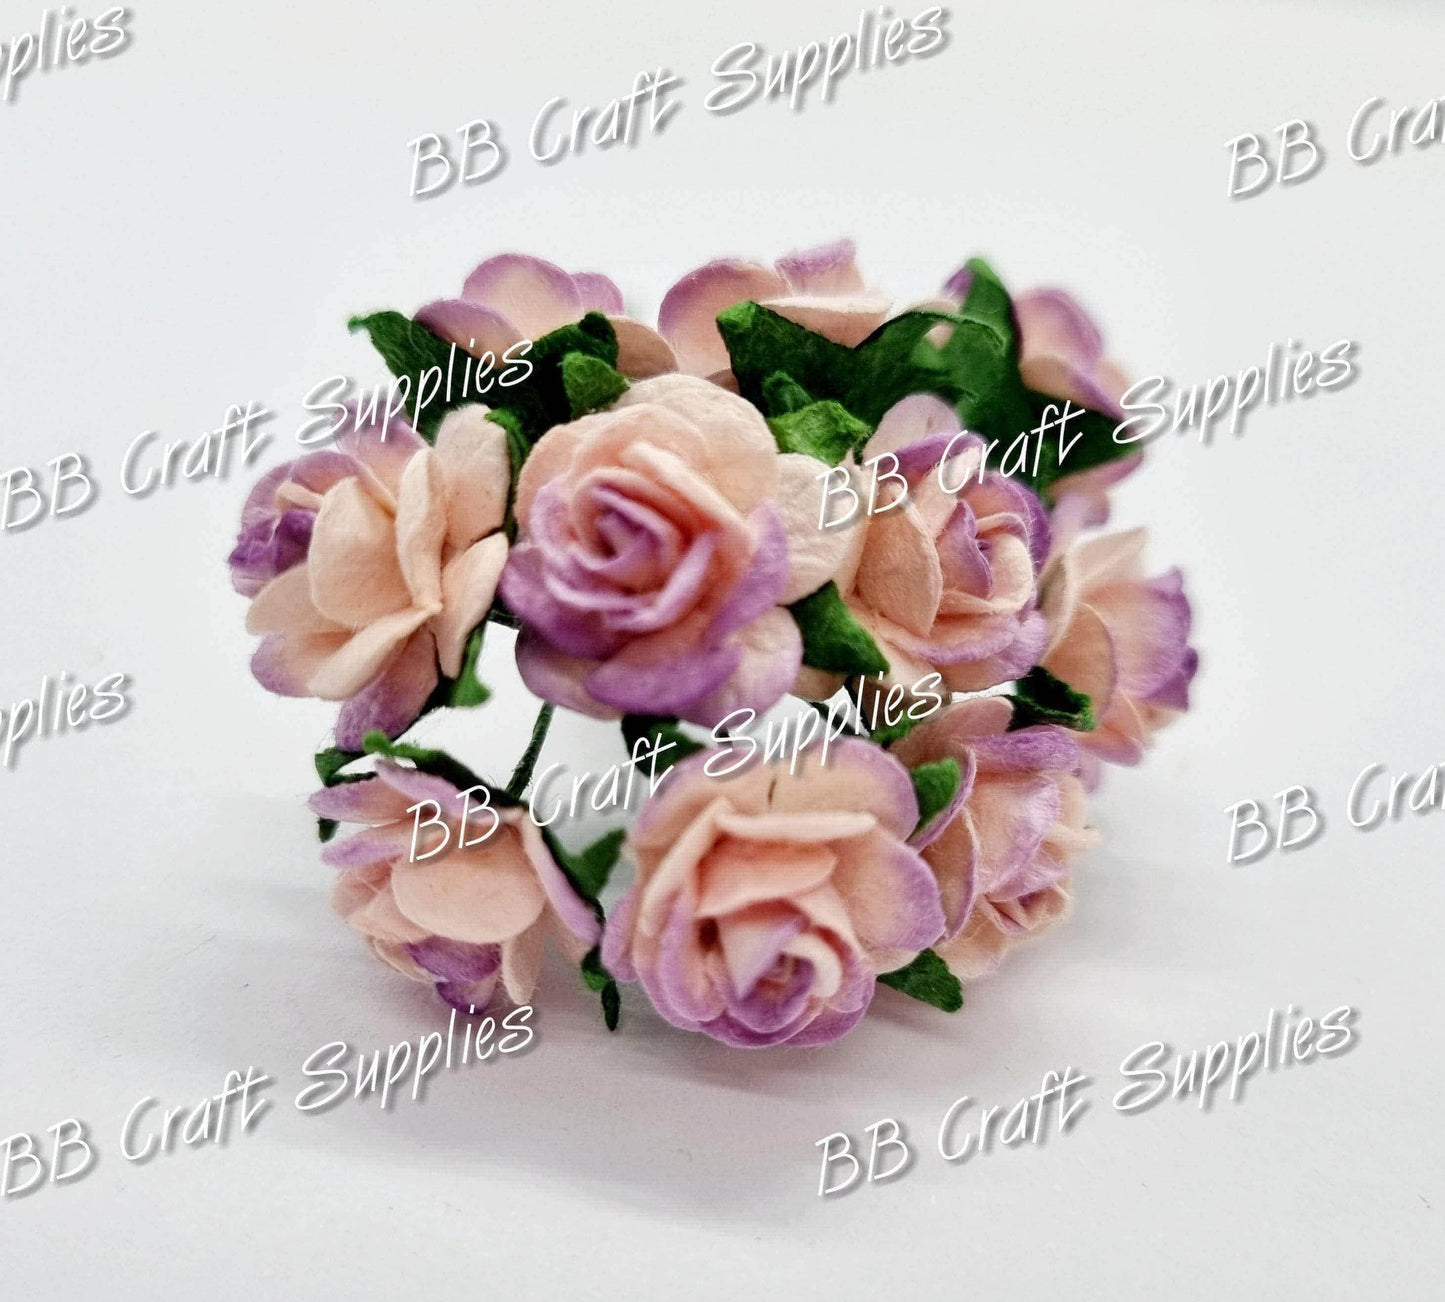 Mini Roses Pale Pink/Purple tips 10 Pack - Embelishment, Flower, mini, Mulburry, mullberry, pale, pink, purple, rose - Bare Butler Faux Leather Supplies 